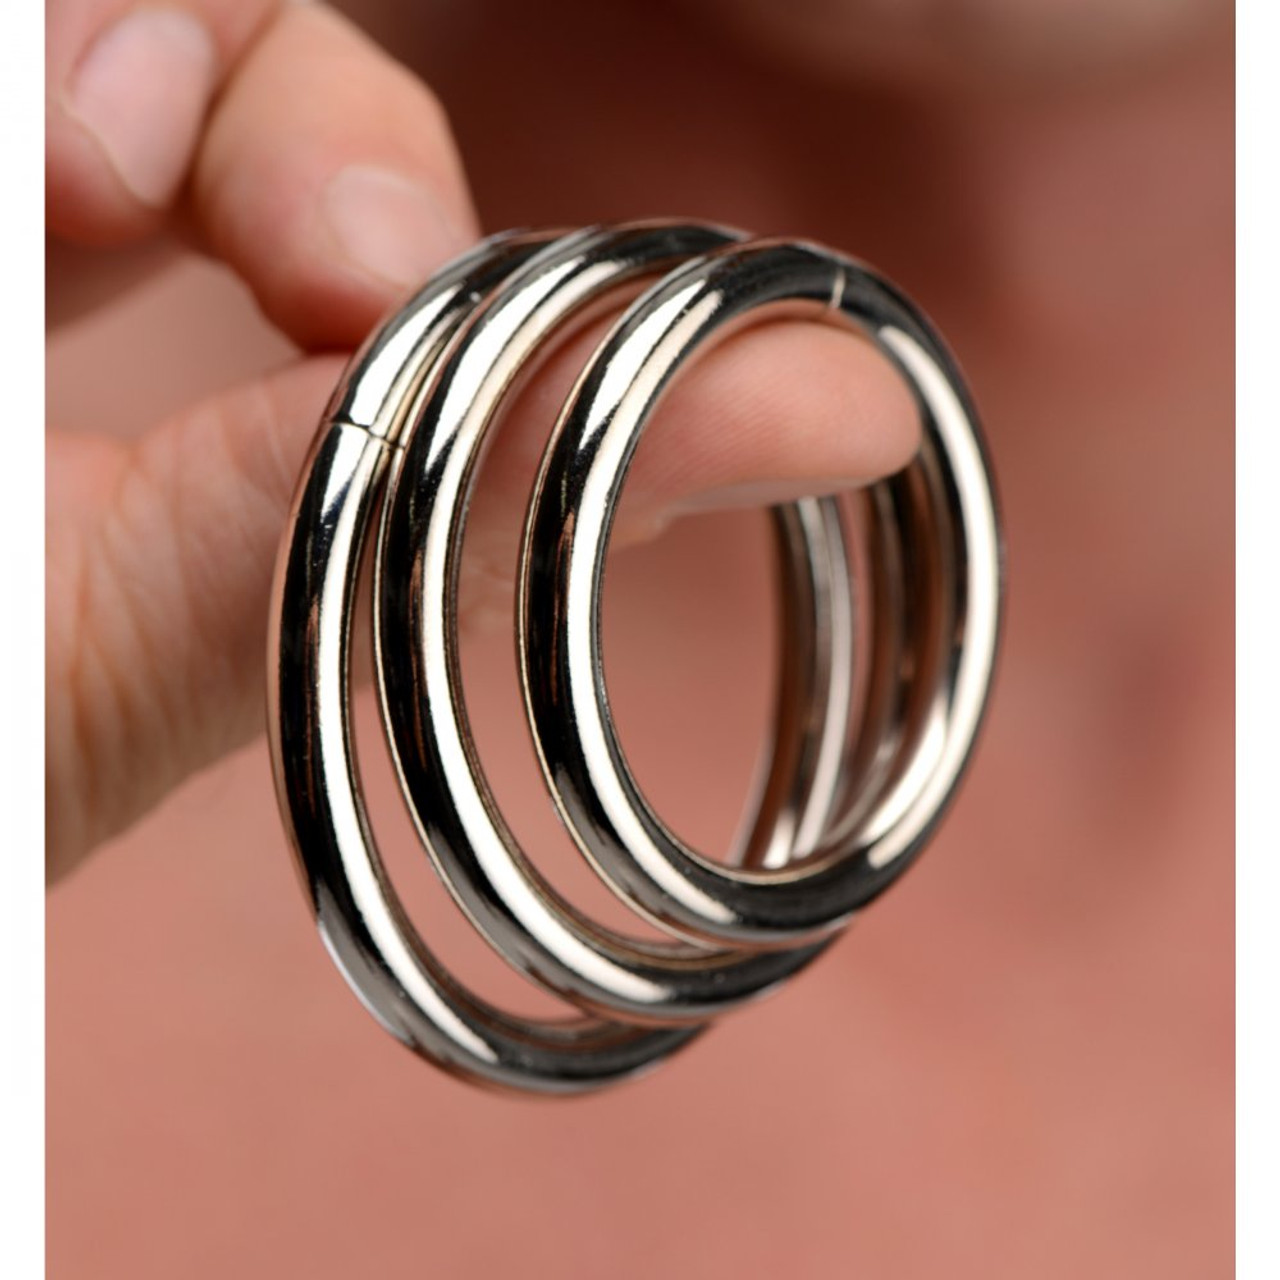 Master Series Trine Steel Ring Collection